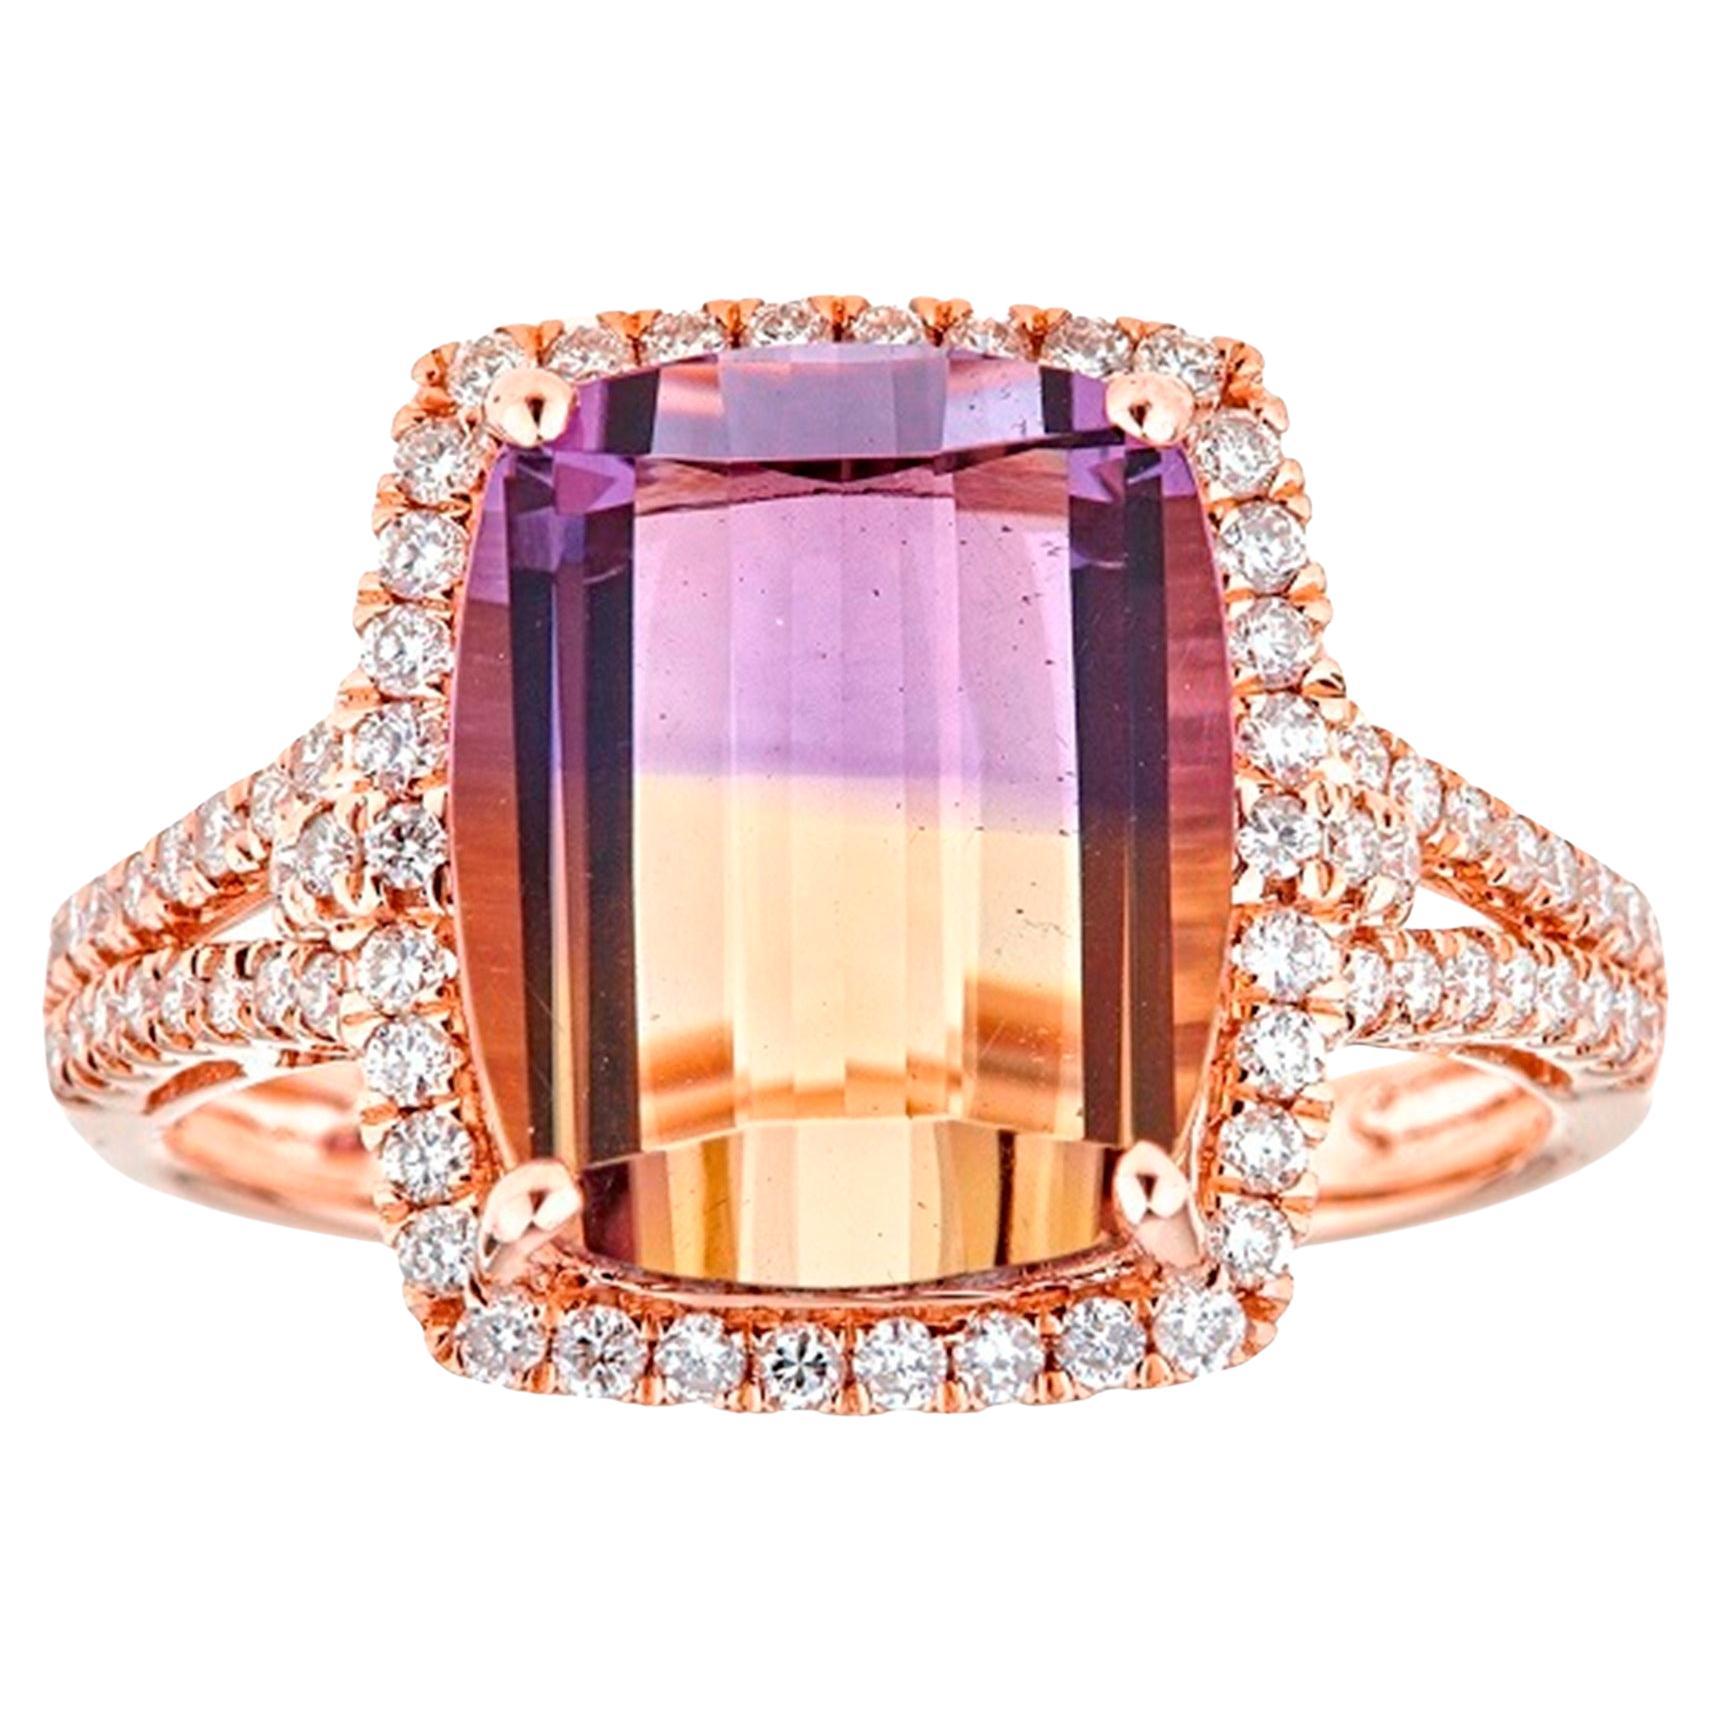 Classic 14k Rose Gold Cushion-Cut Ametrine with White Diamond Accents Ring